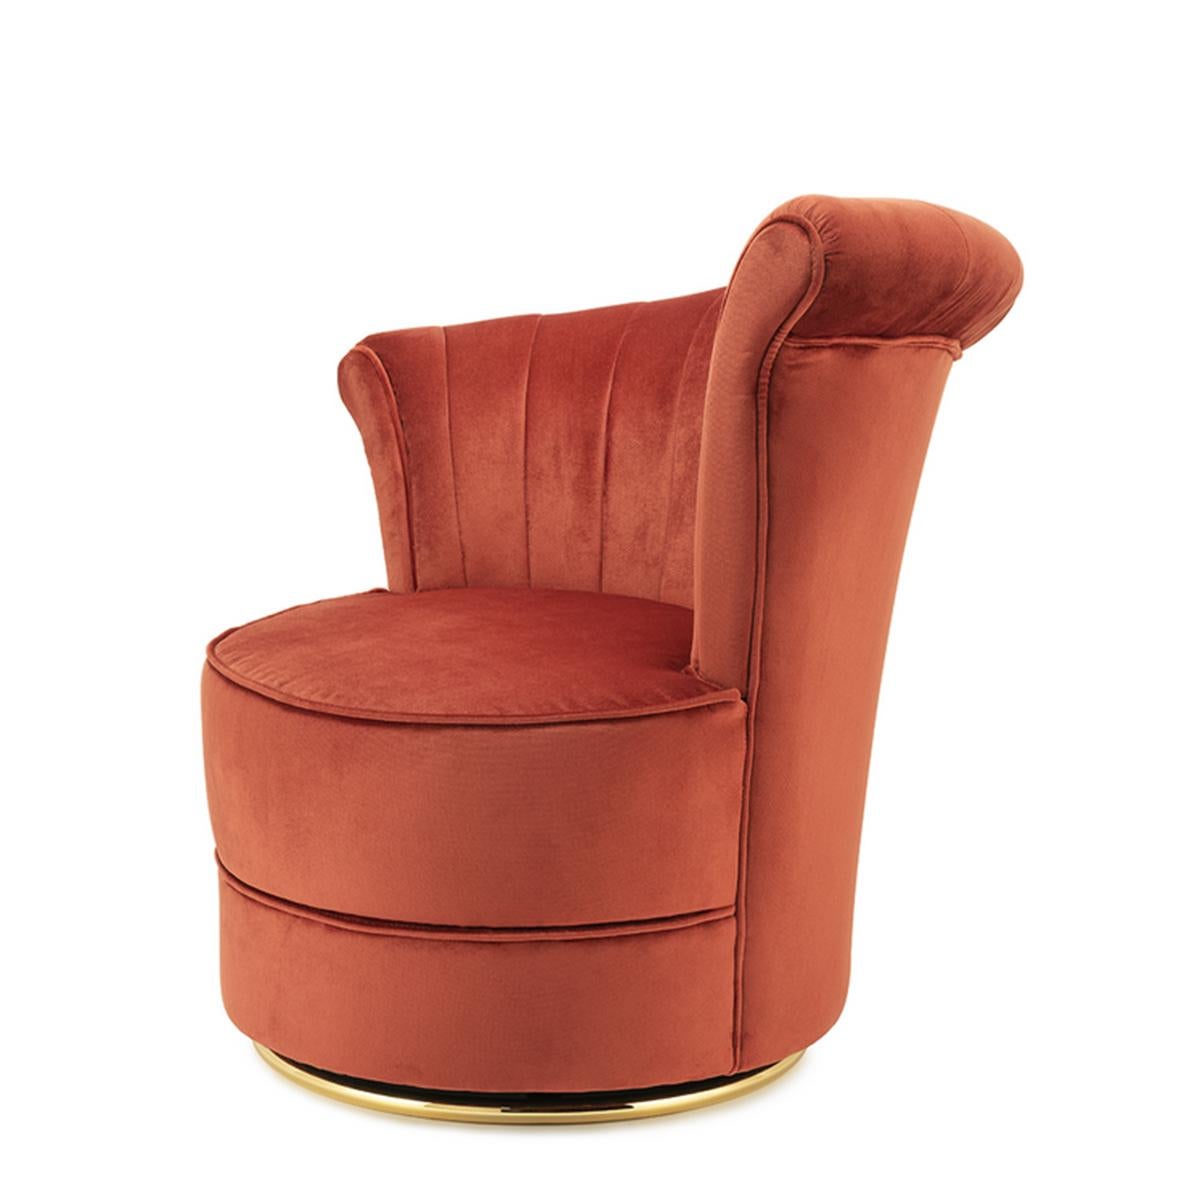 Armchair wing Coralorange with structure in solid
wood cover with coral-orange velvet fabric. With gold finish
round base frame.